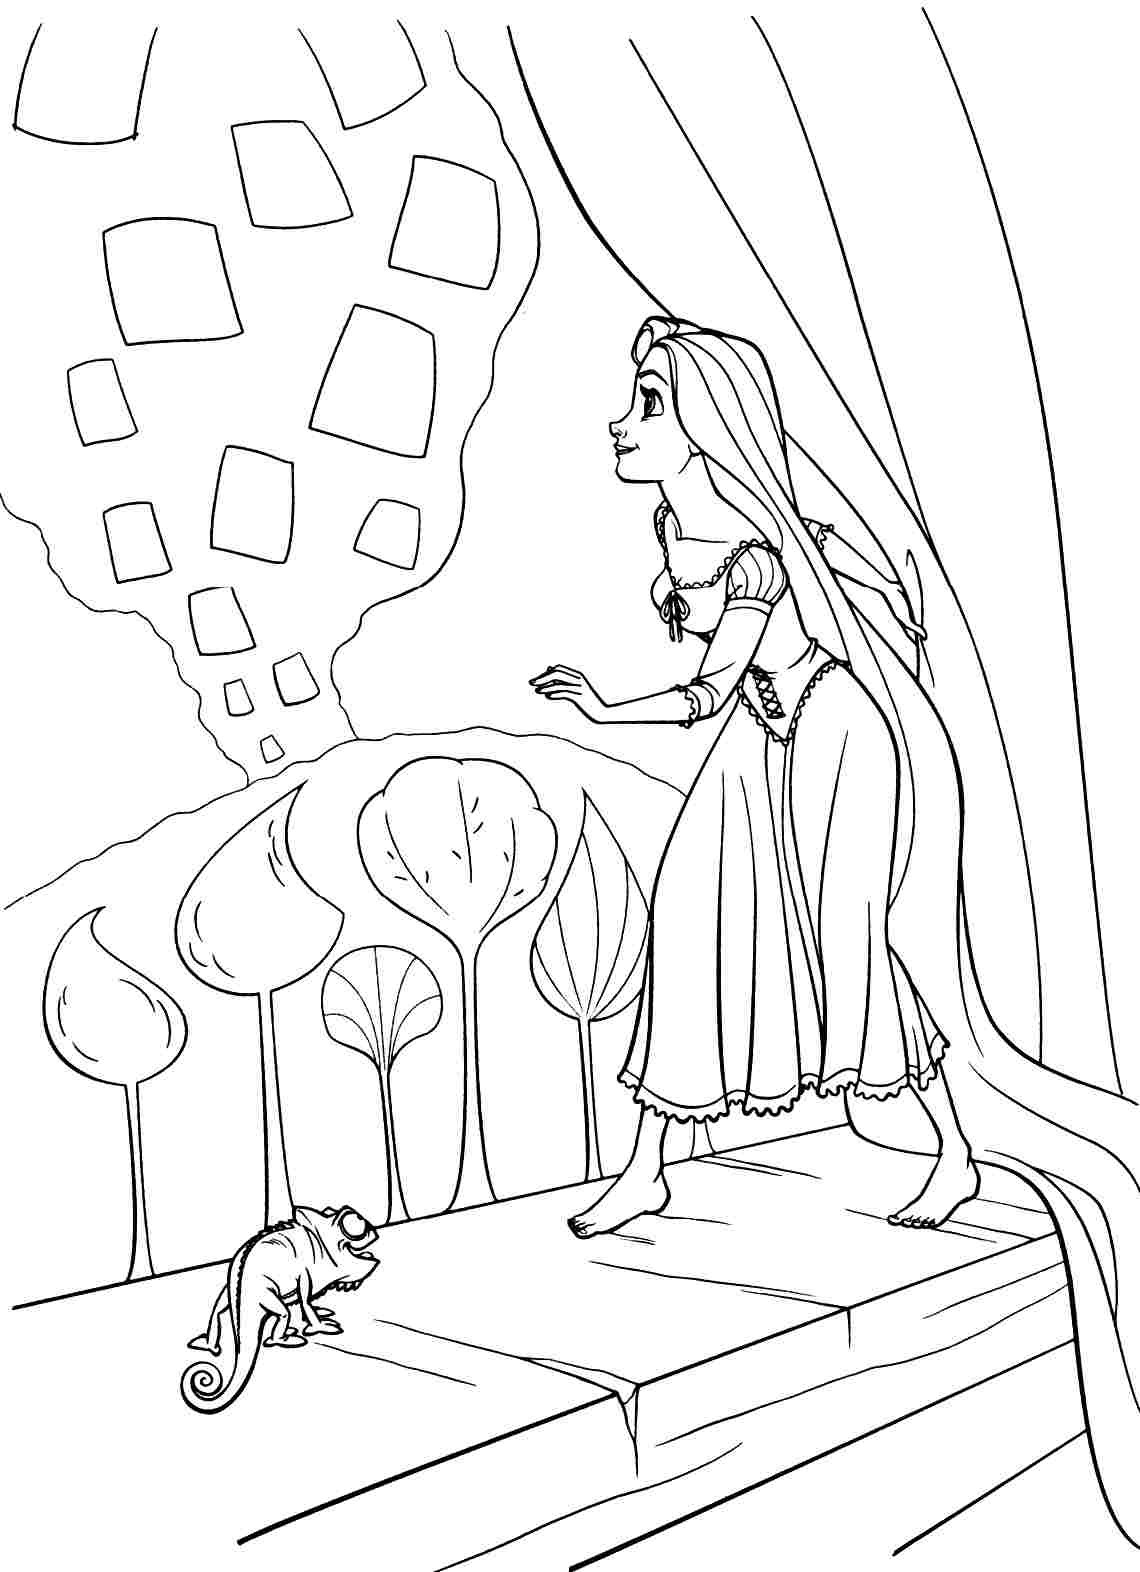 Download Coloring Pages For Kids
 Rapunzel Coloring Pages Best Coloring Pages For Kids